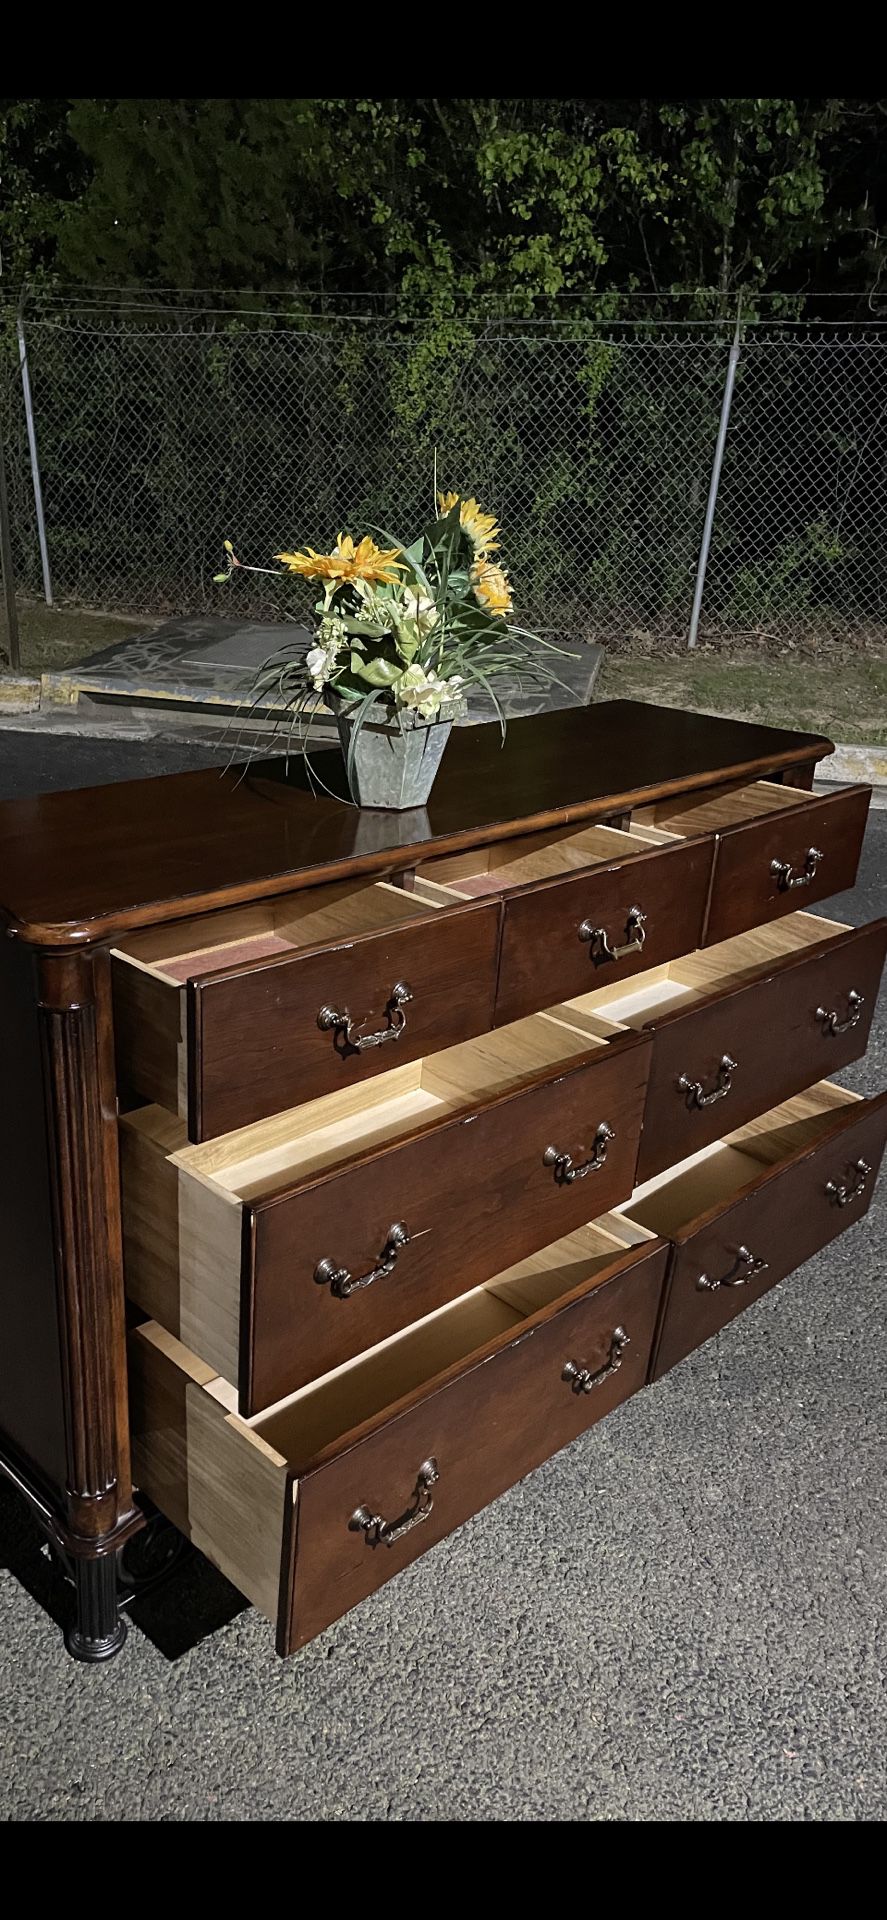 Quality Solid Wood Long Dresser, Big Drawers. Drawers Sliding Smoothly Great Confition